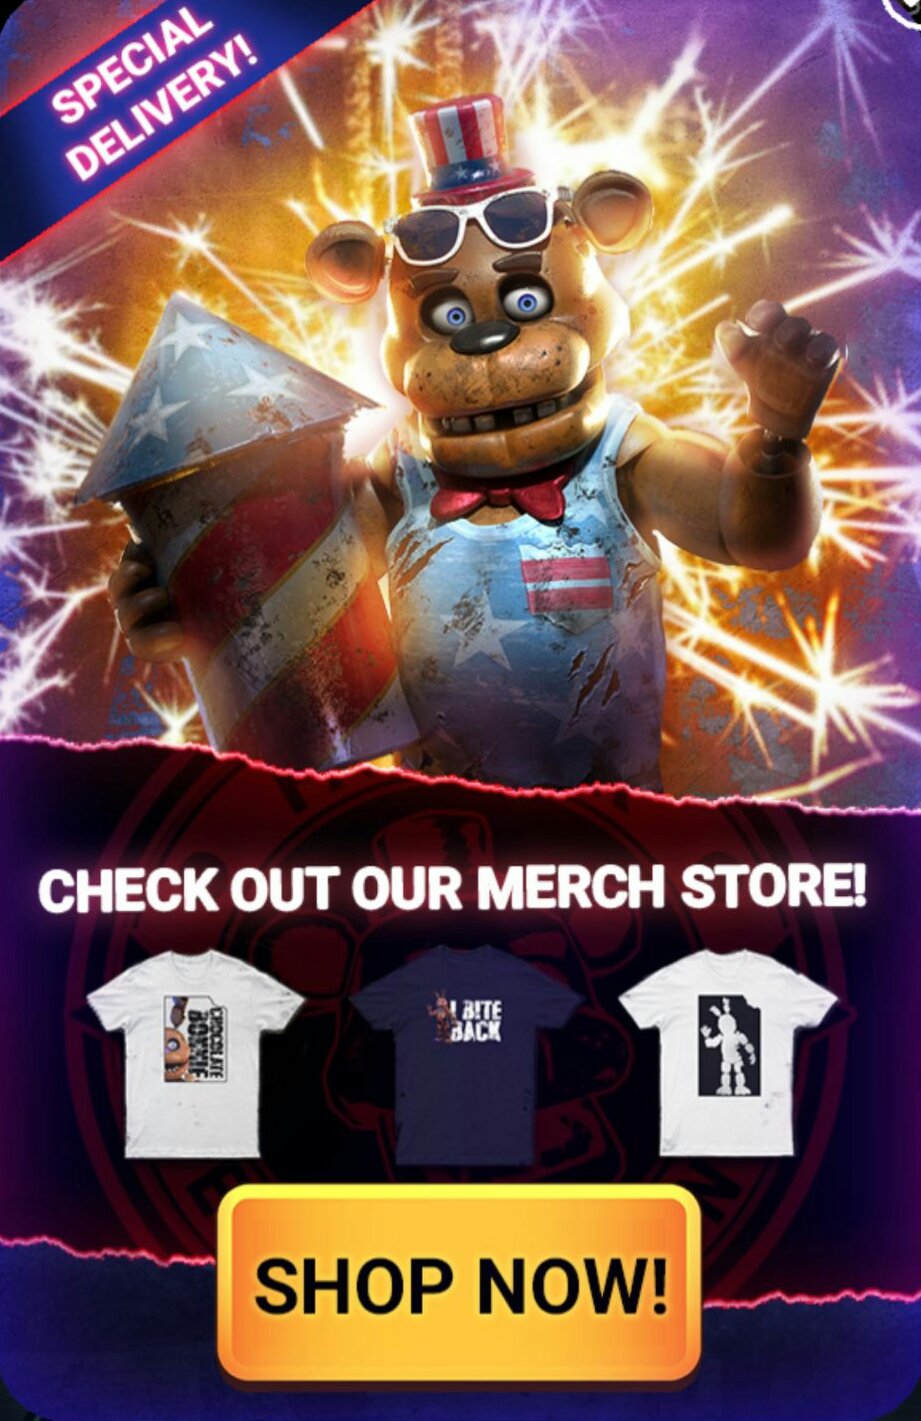 Got my hands on an offical fnaf movie poster (and a firework freddy figure)  : r/fivenightsatfreddys